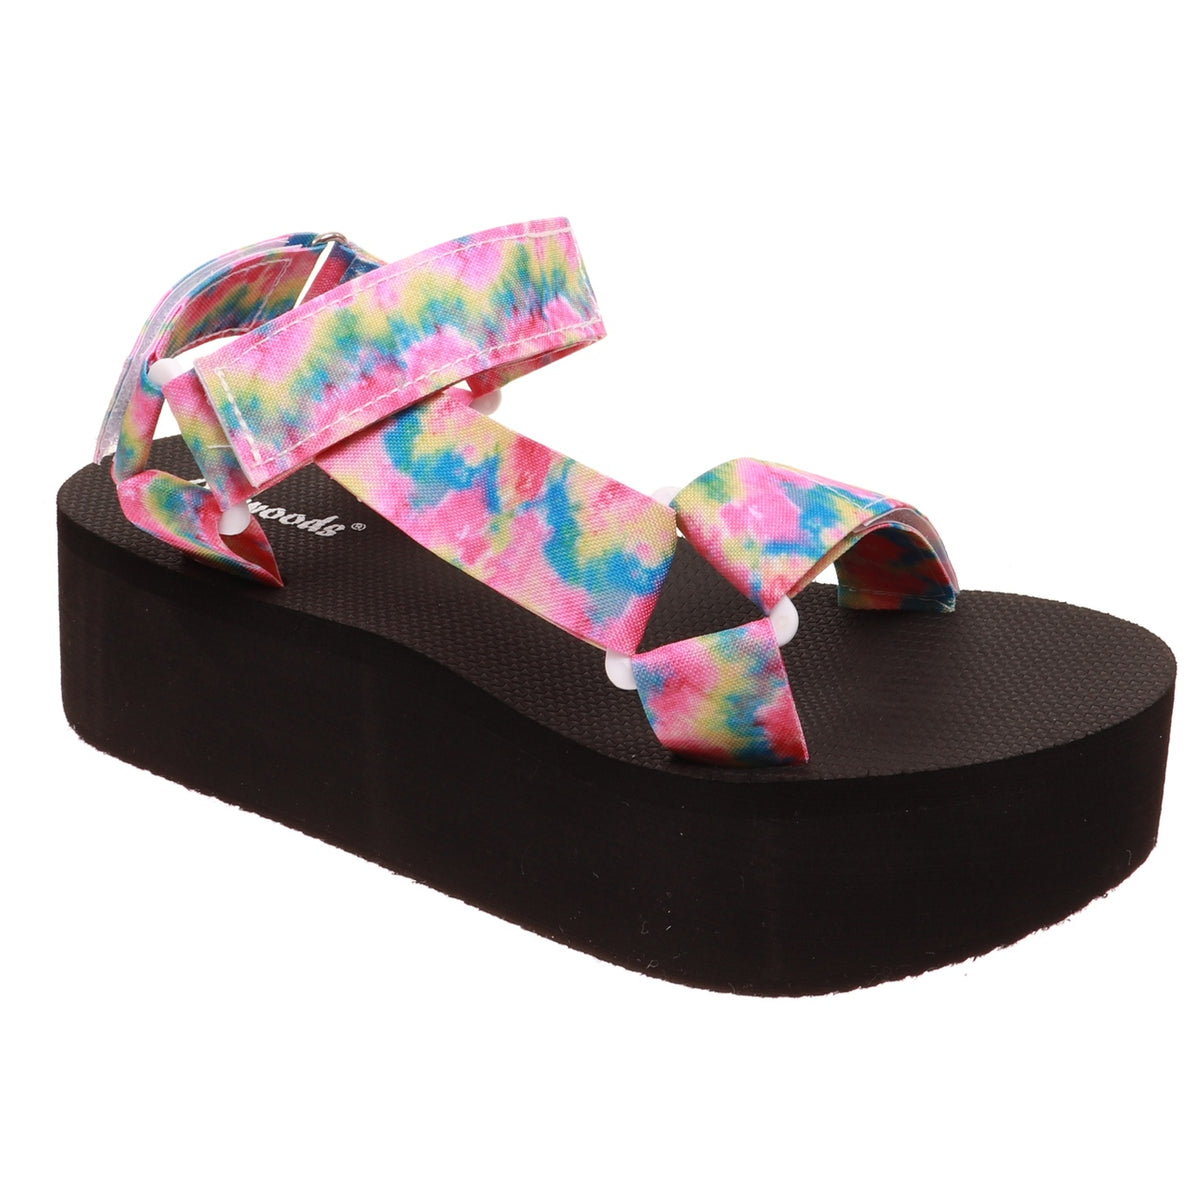 Outwoods Wedge Pastel Sandal